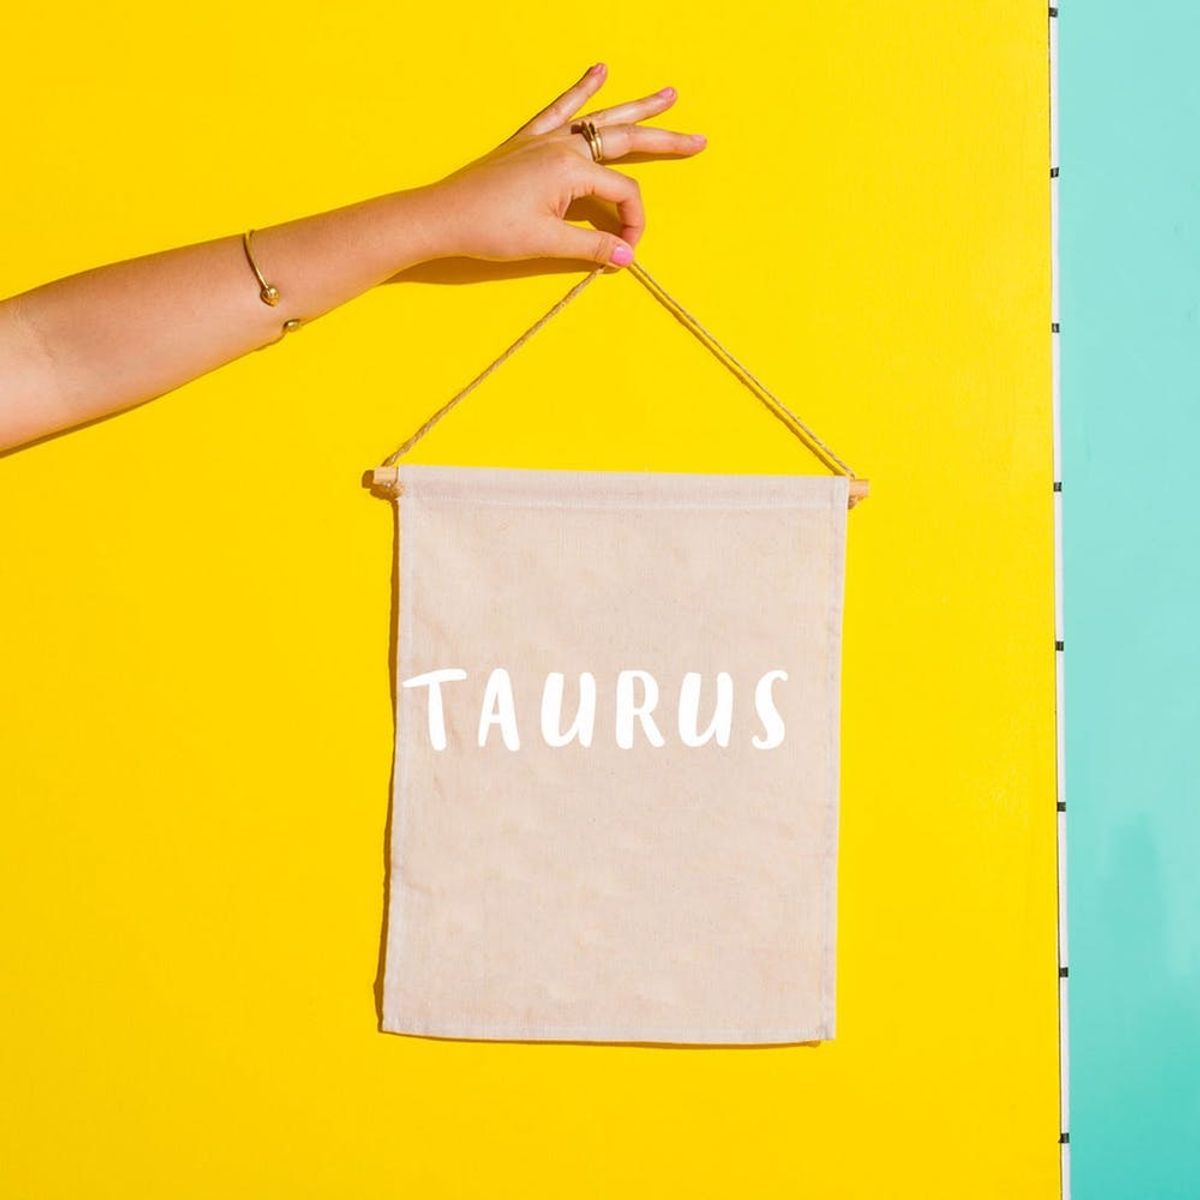 We Have the Perfect Birthday Gift for Your Taurus BFF